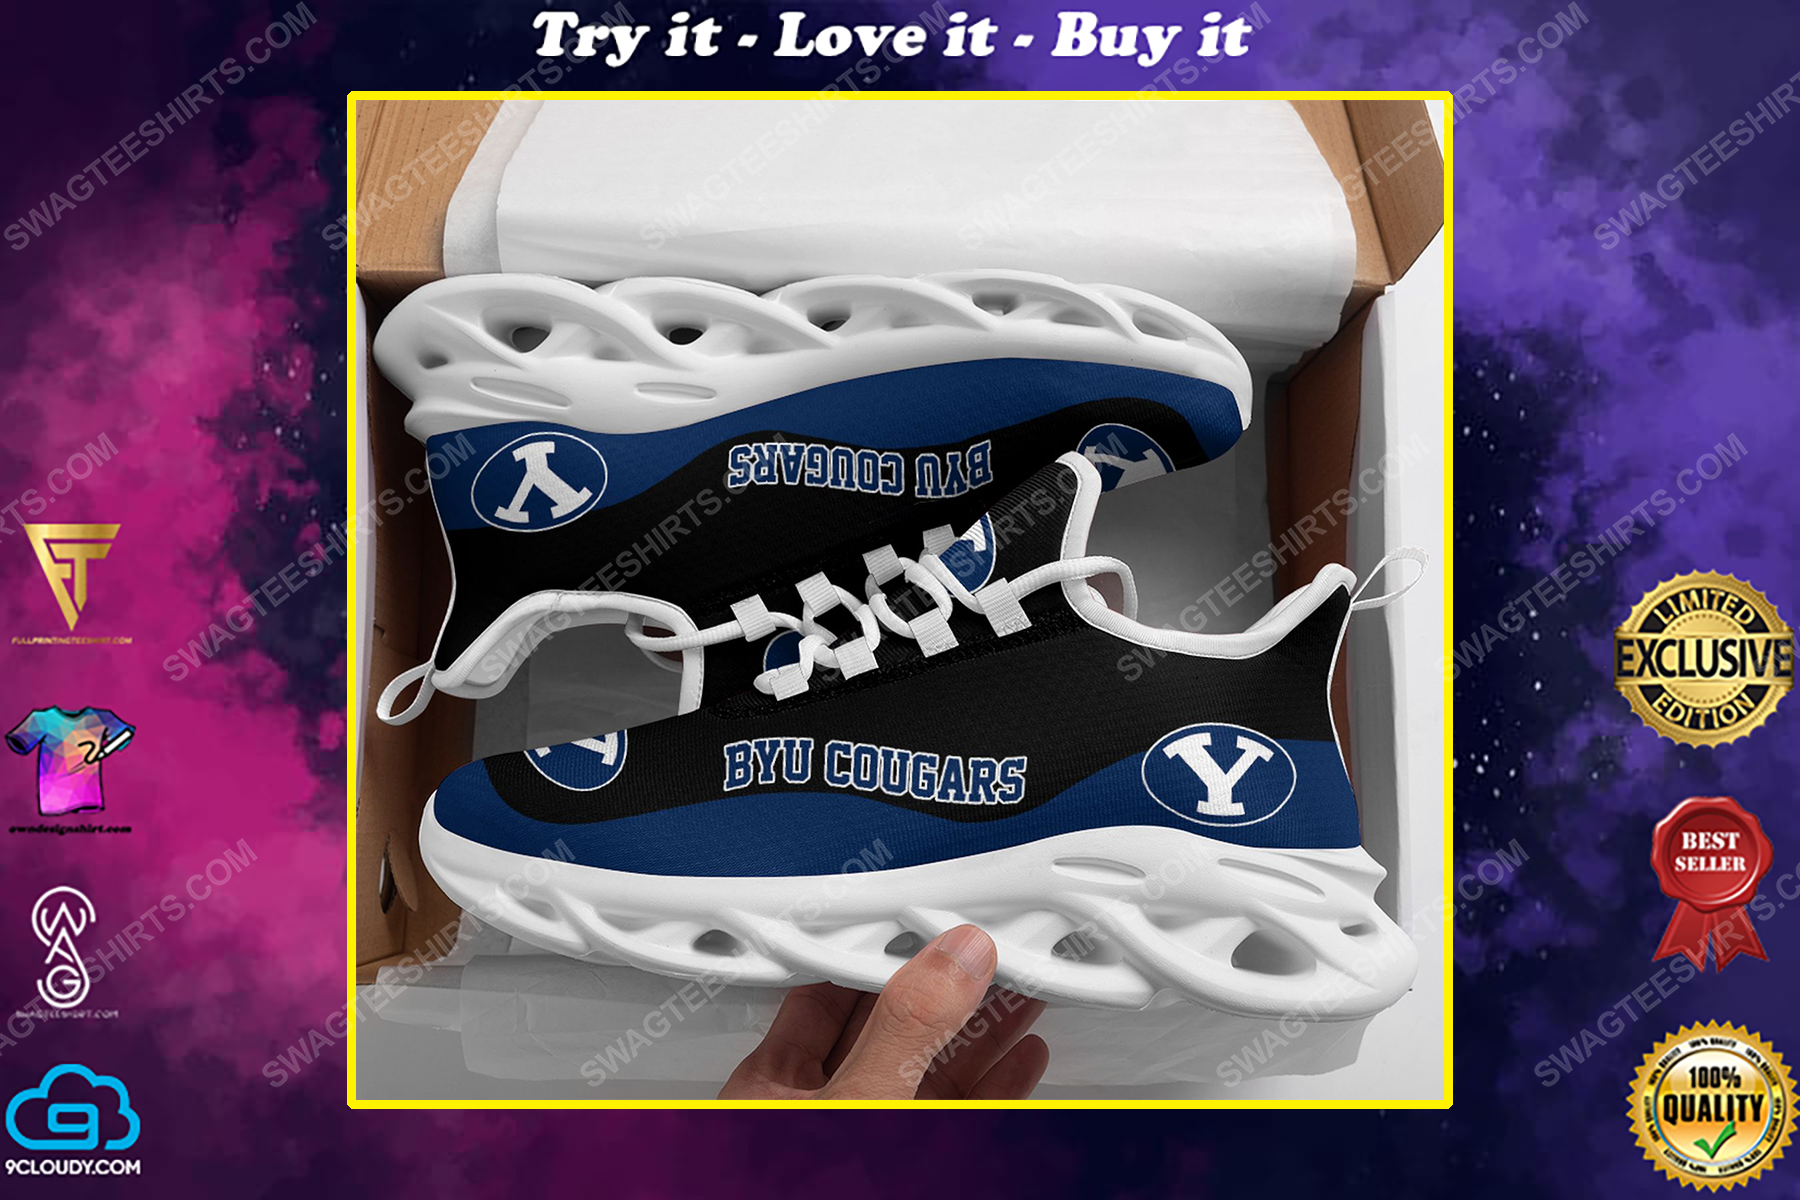 The byu cougars football team max soul shoes